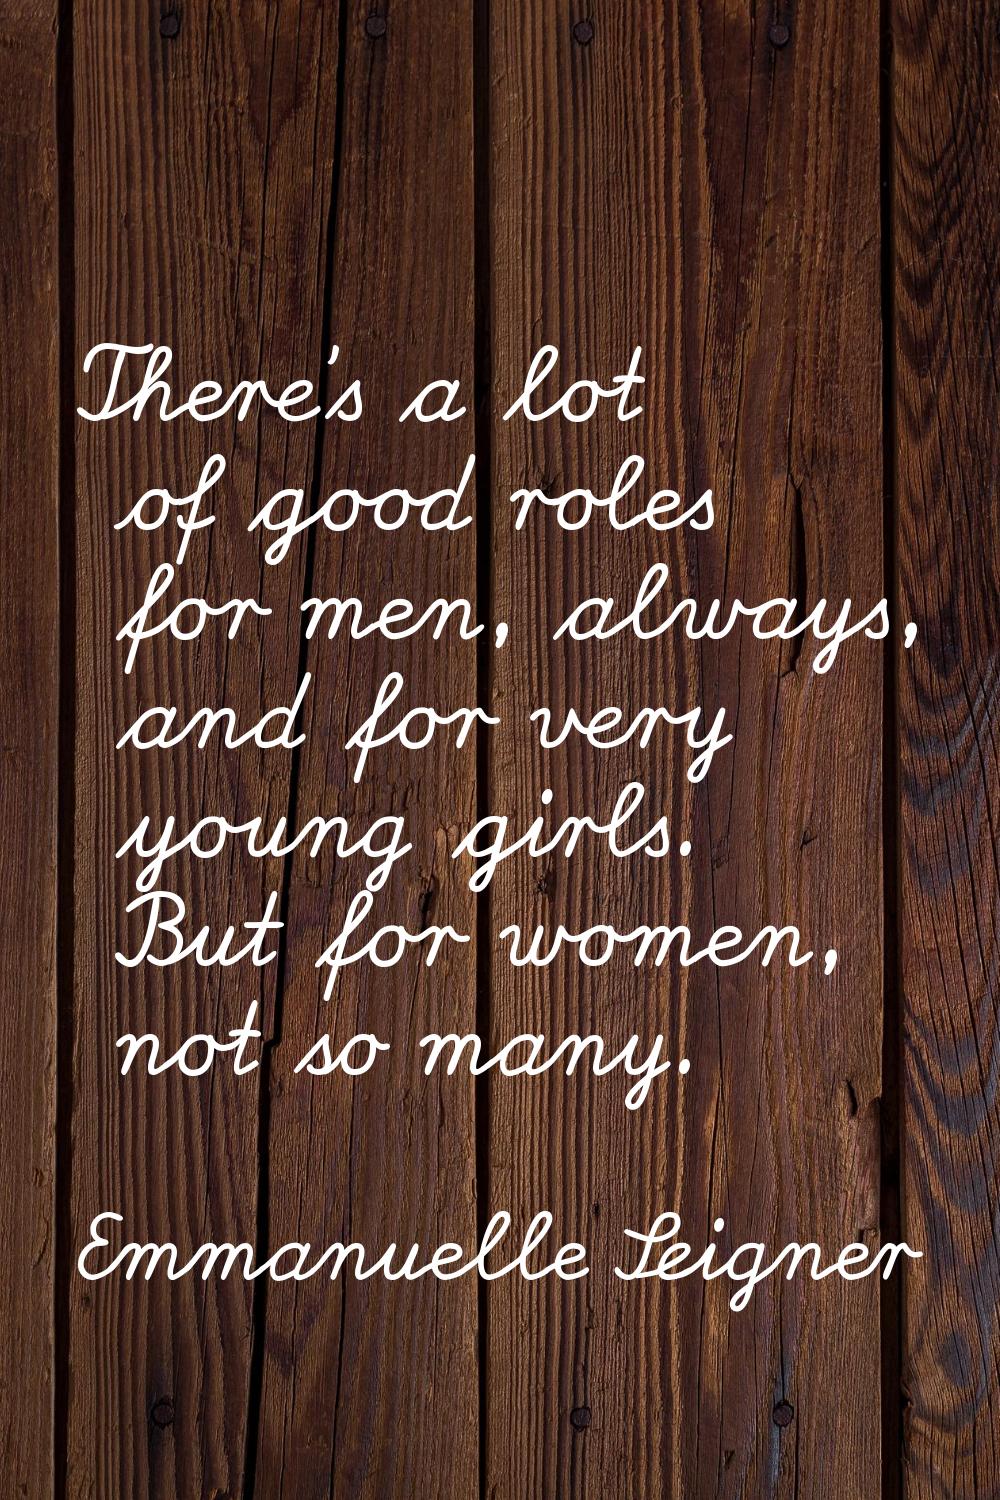 There's a lot of good roles for men, always, and for very young girls. But for women, not so many.